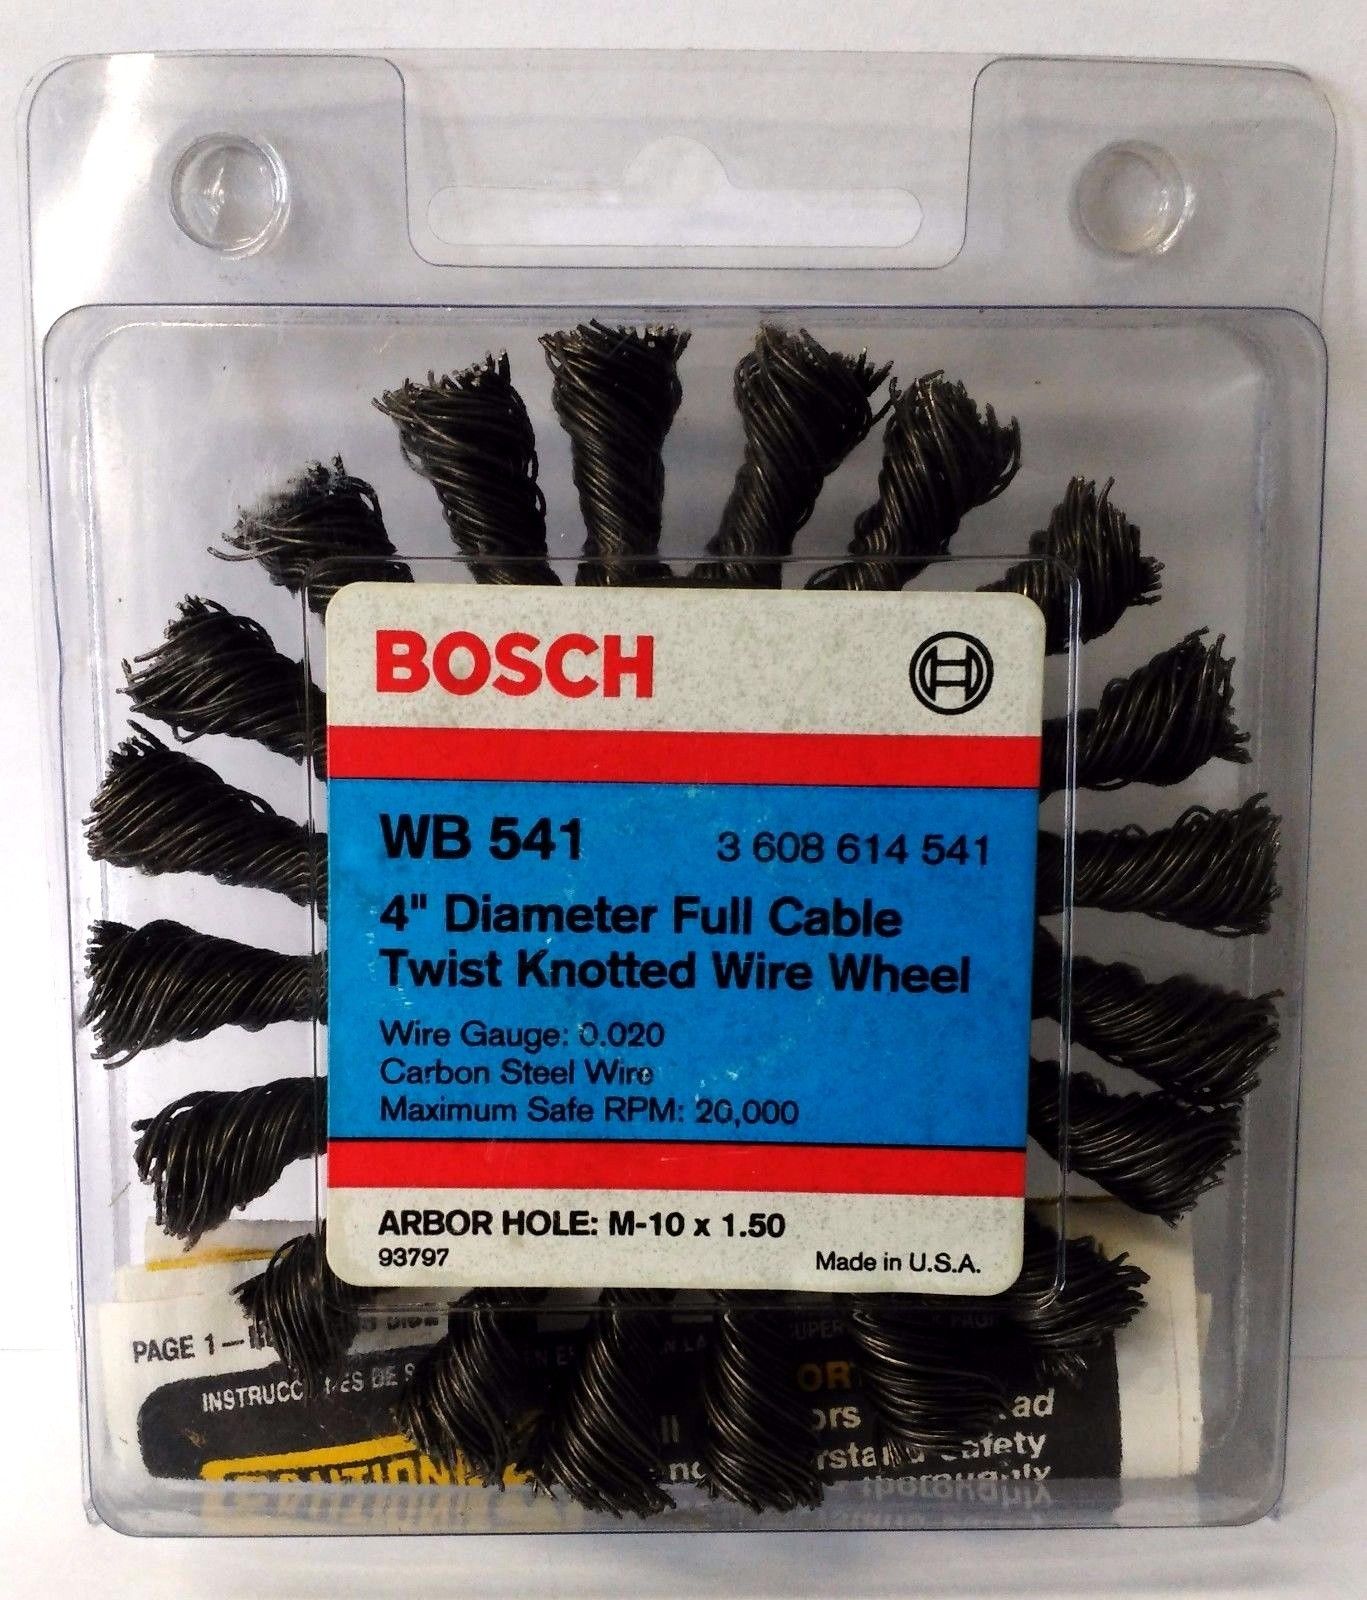 Bosch WB 541 4" Full Cable Twist Knotted Wire Wheel Arbor M-10 x 1.50 USA